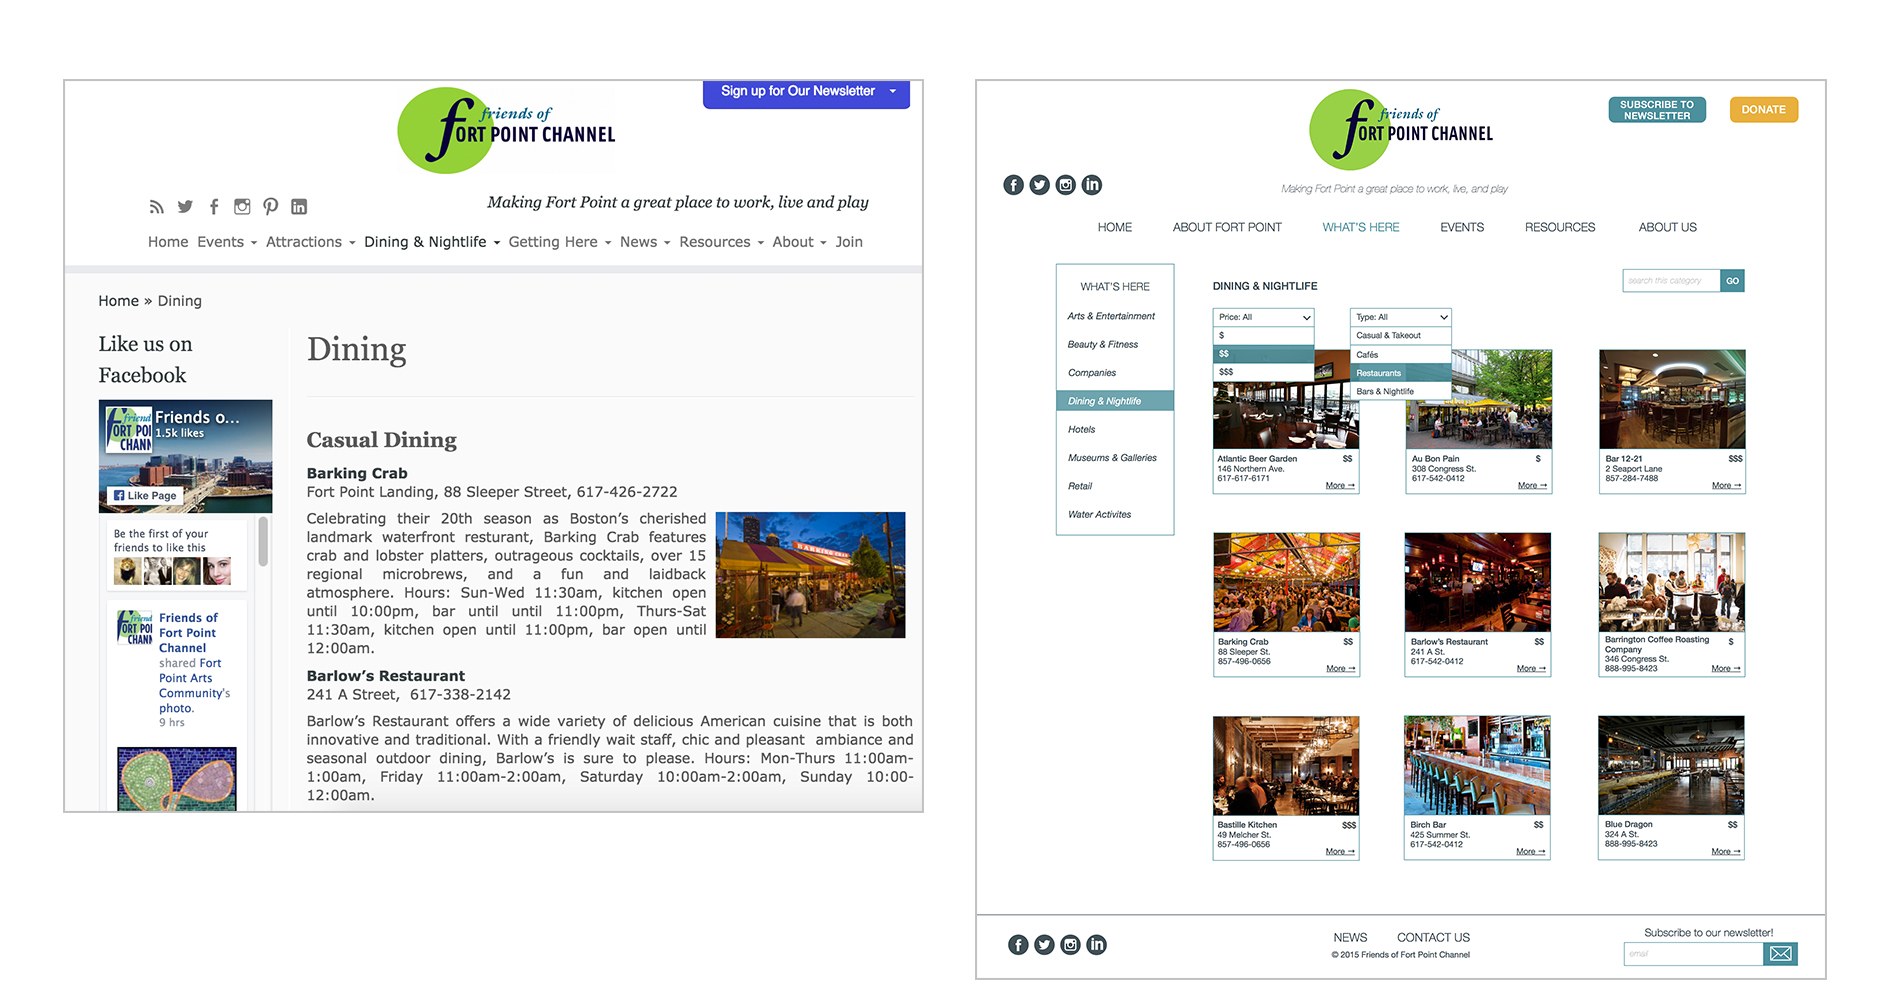 Dining and Nightlife page, before (left) and after (right).